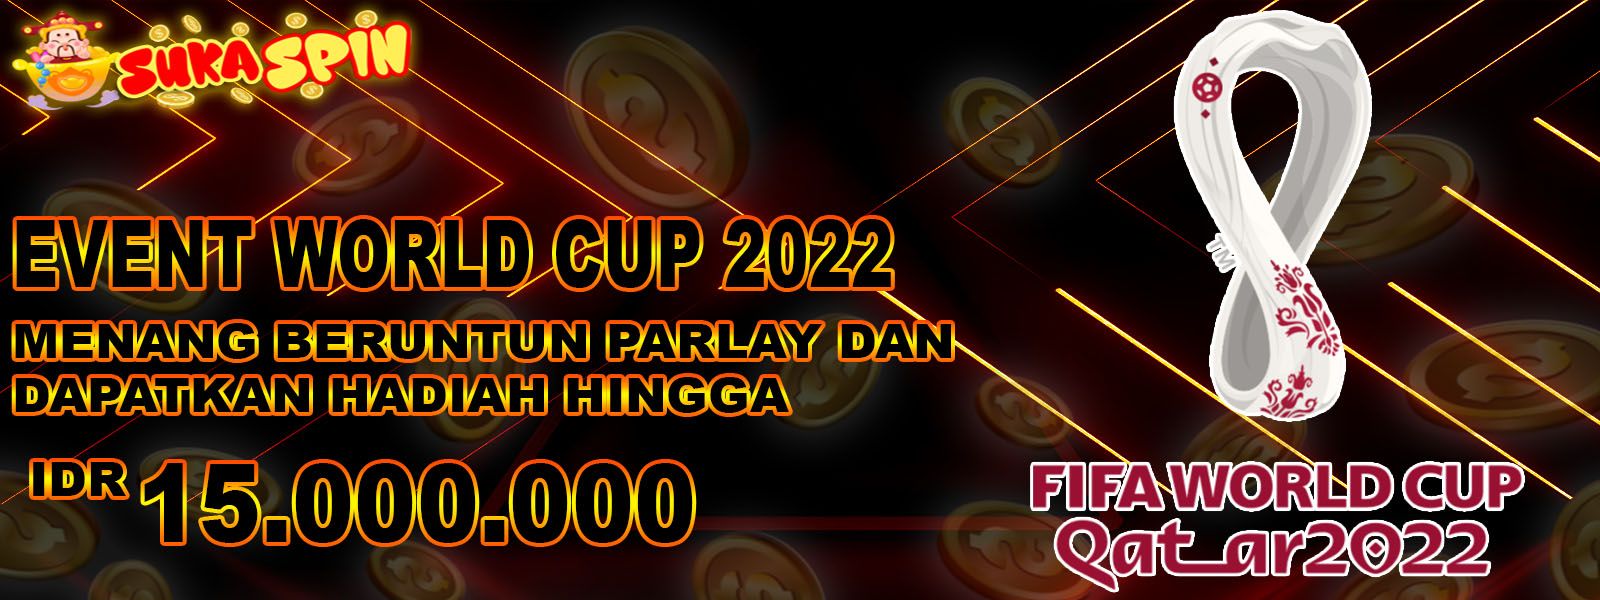 EVENT WORDLCUP SUKASPIN 2022